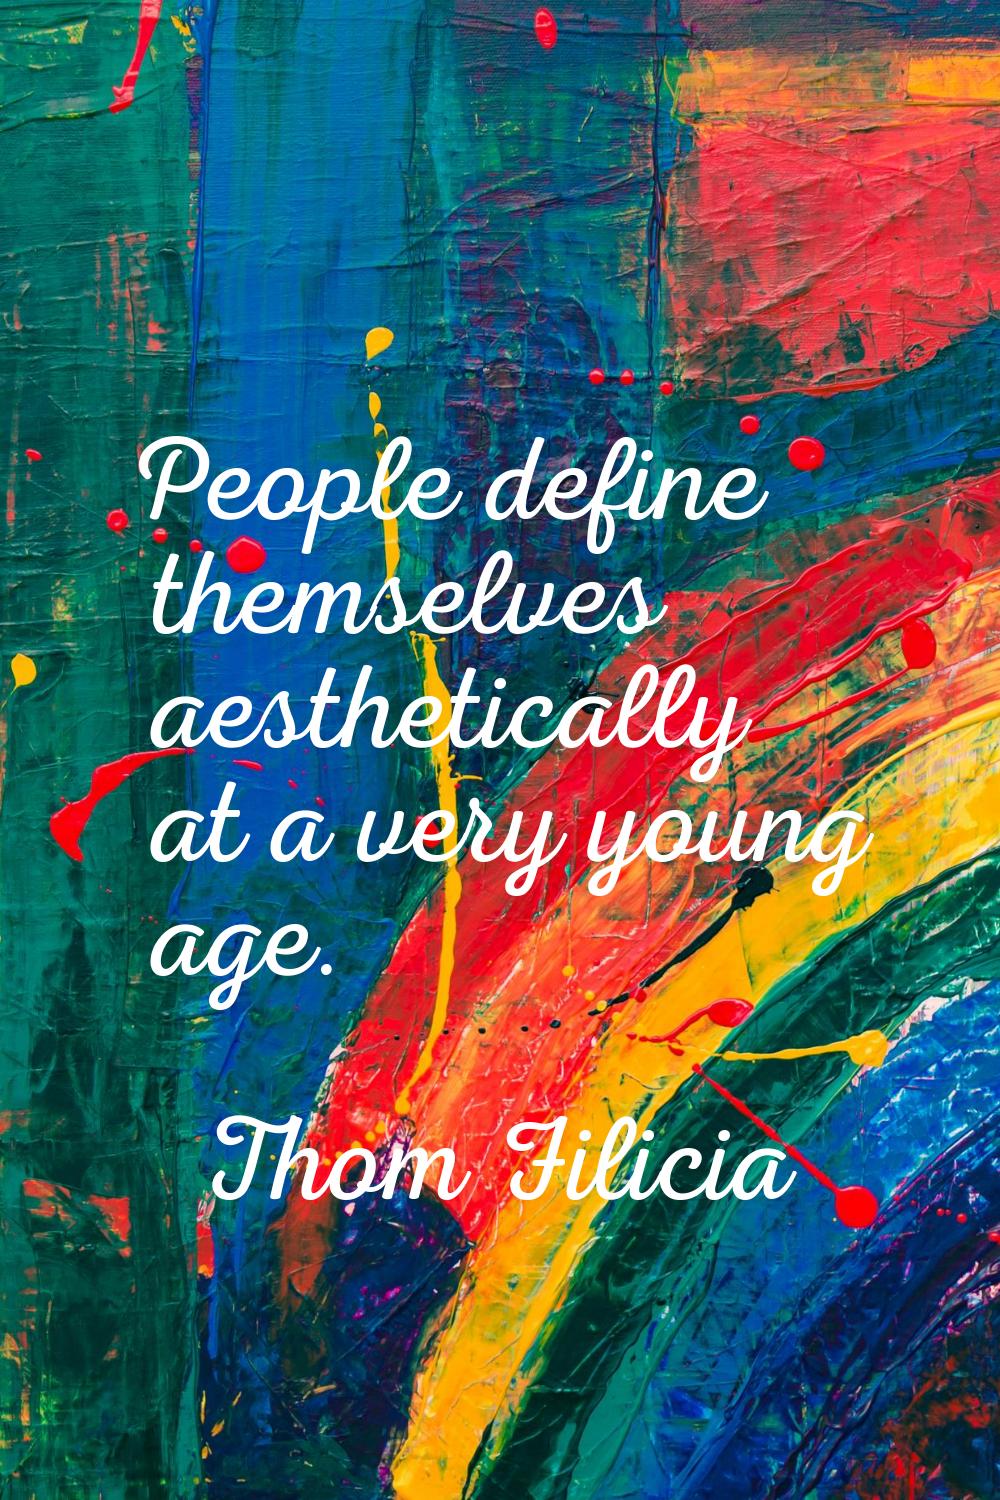 People define themselves aesthetically at a very young age.